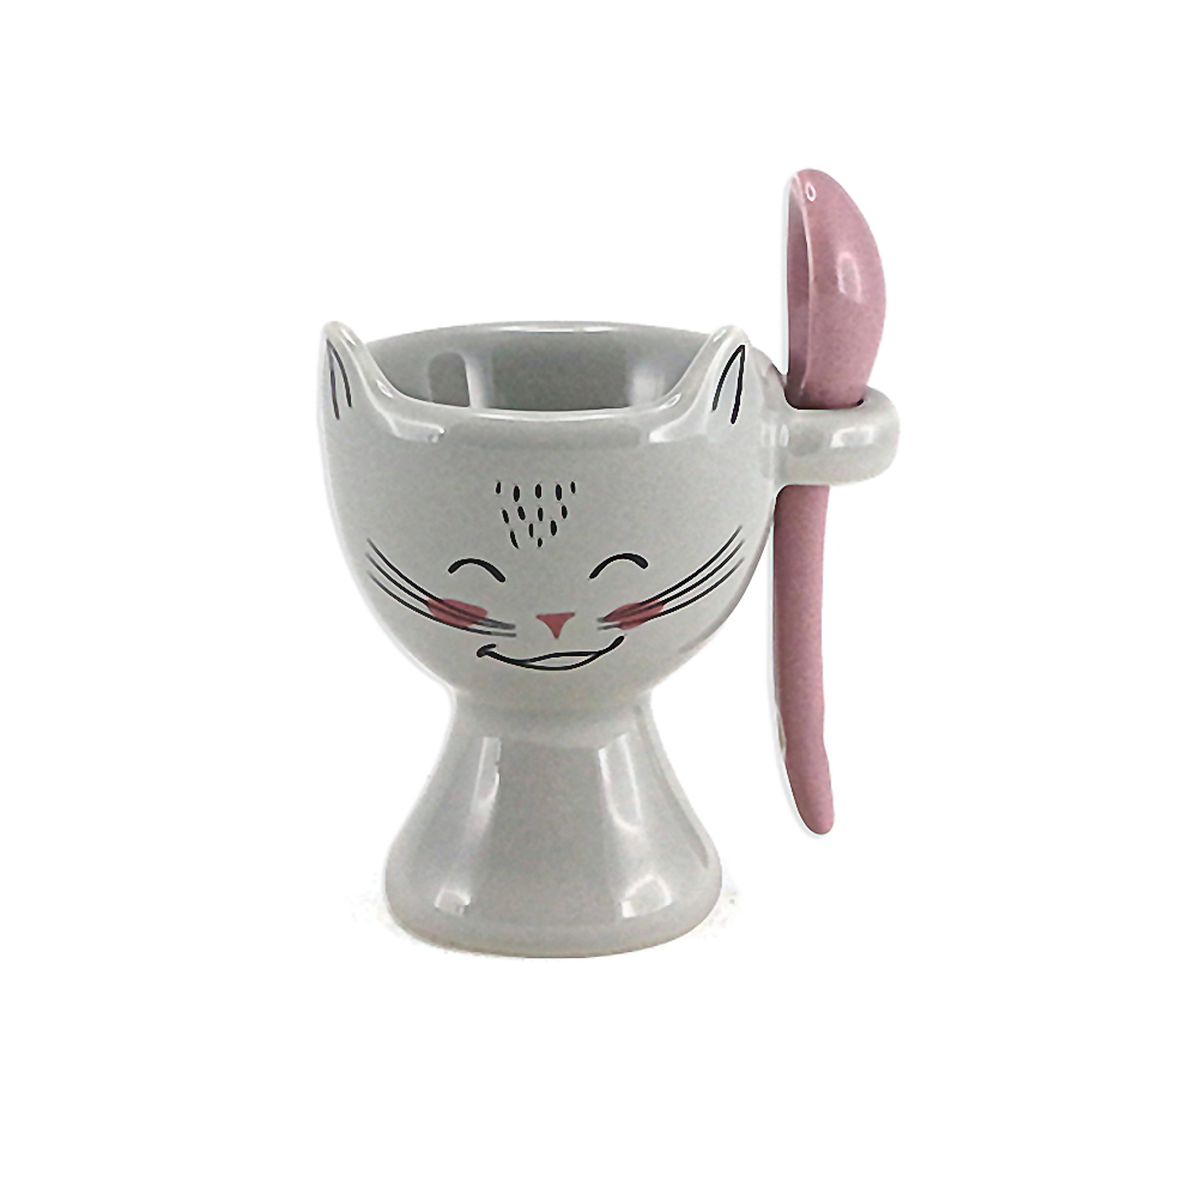 Ceramic Egg Cup with spoon - PACHAT Collection